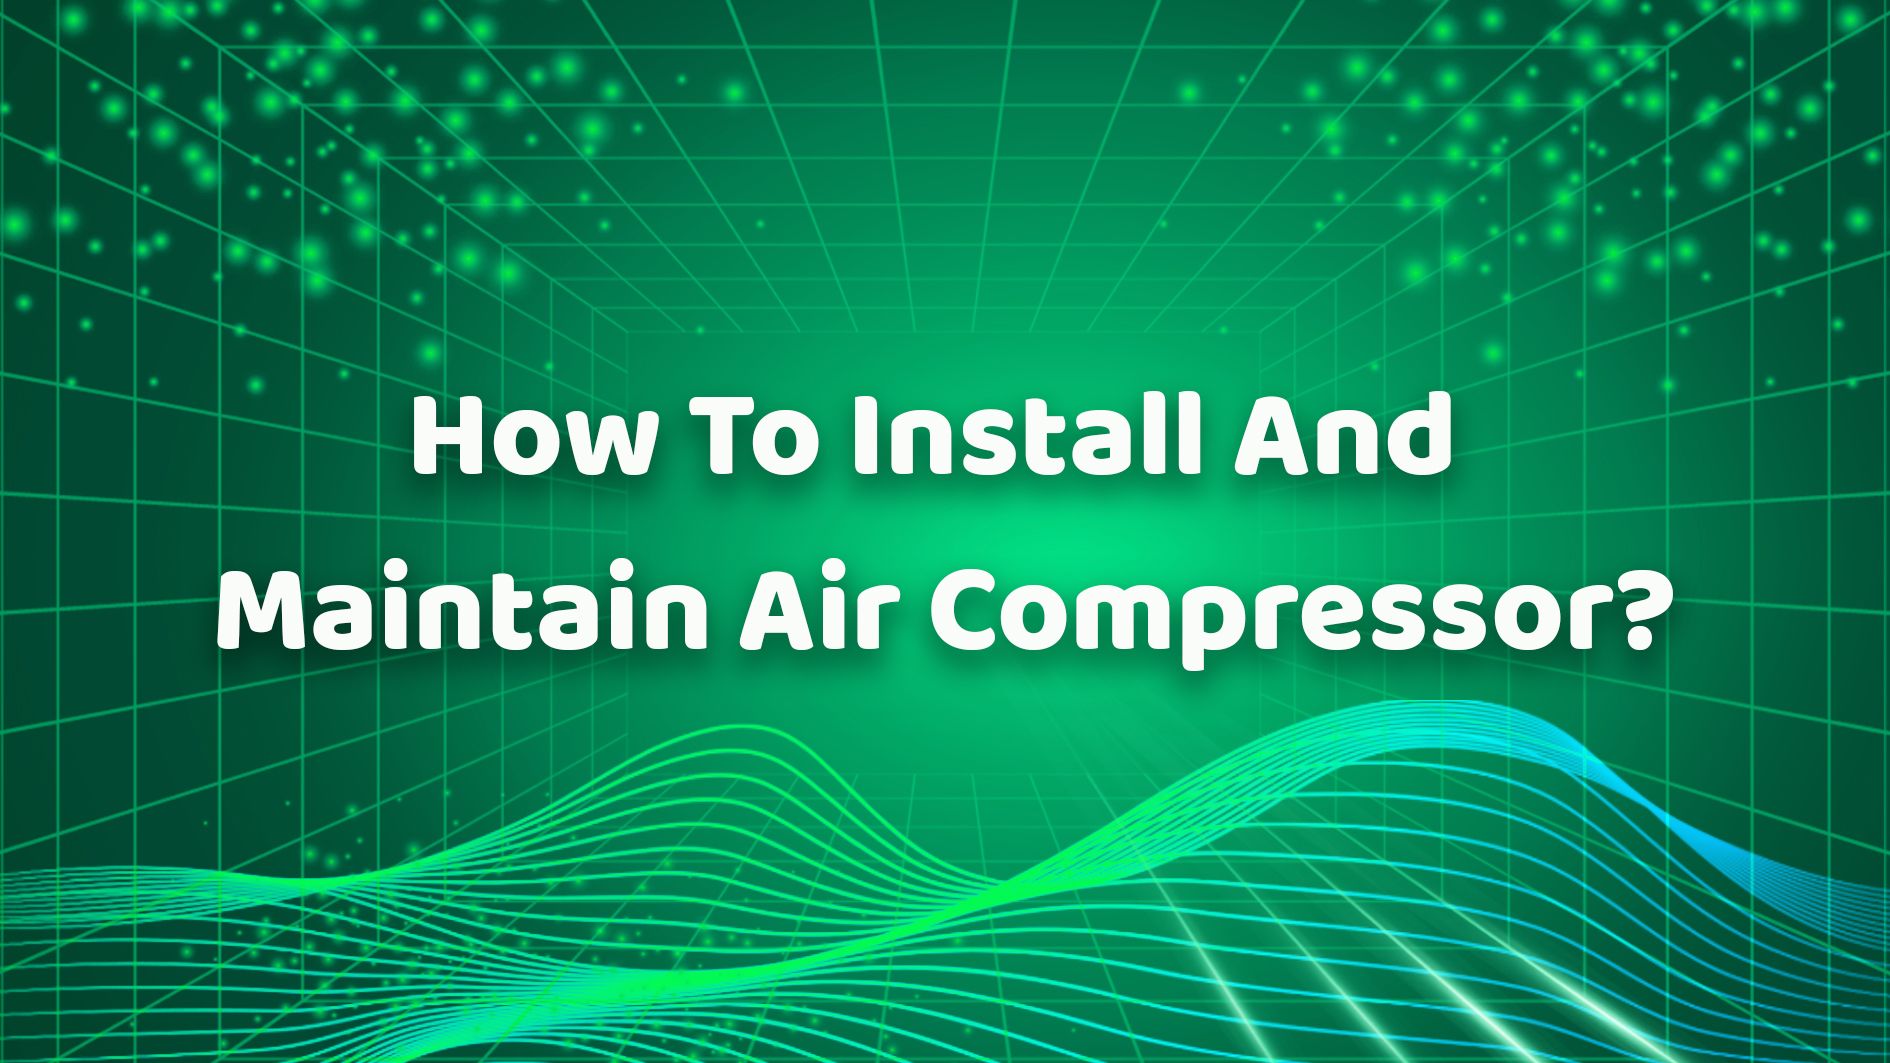 How To Install And Maintain Air Compressor